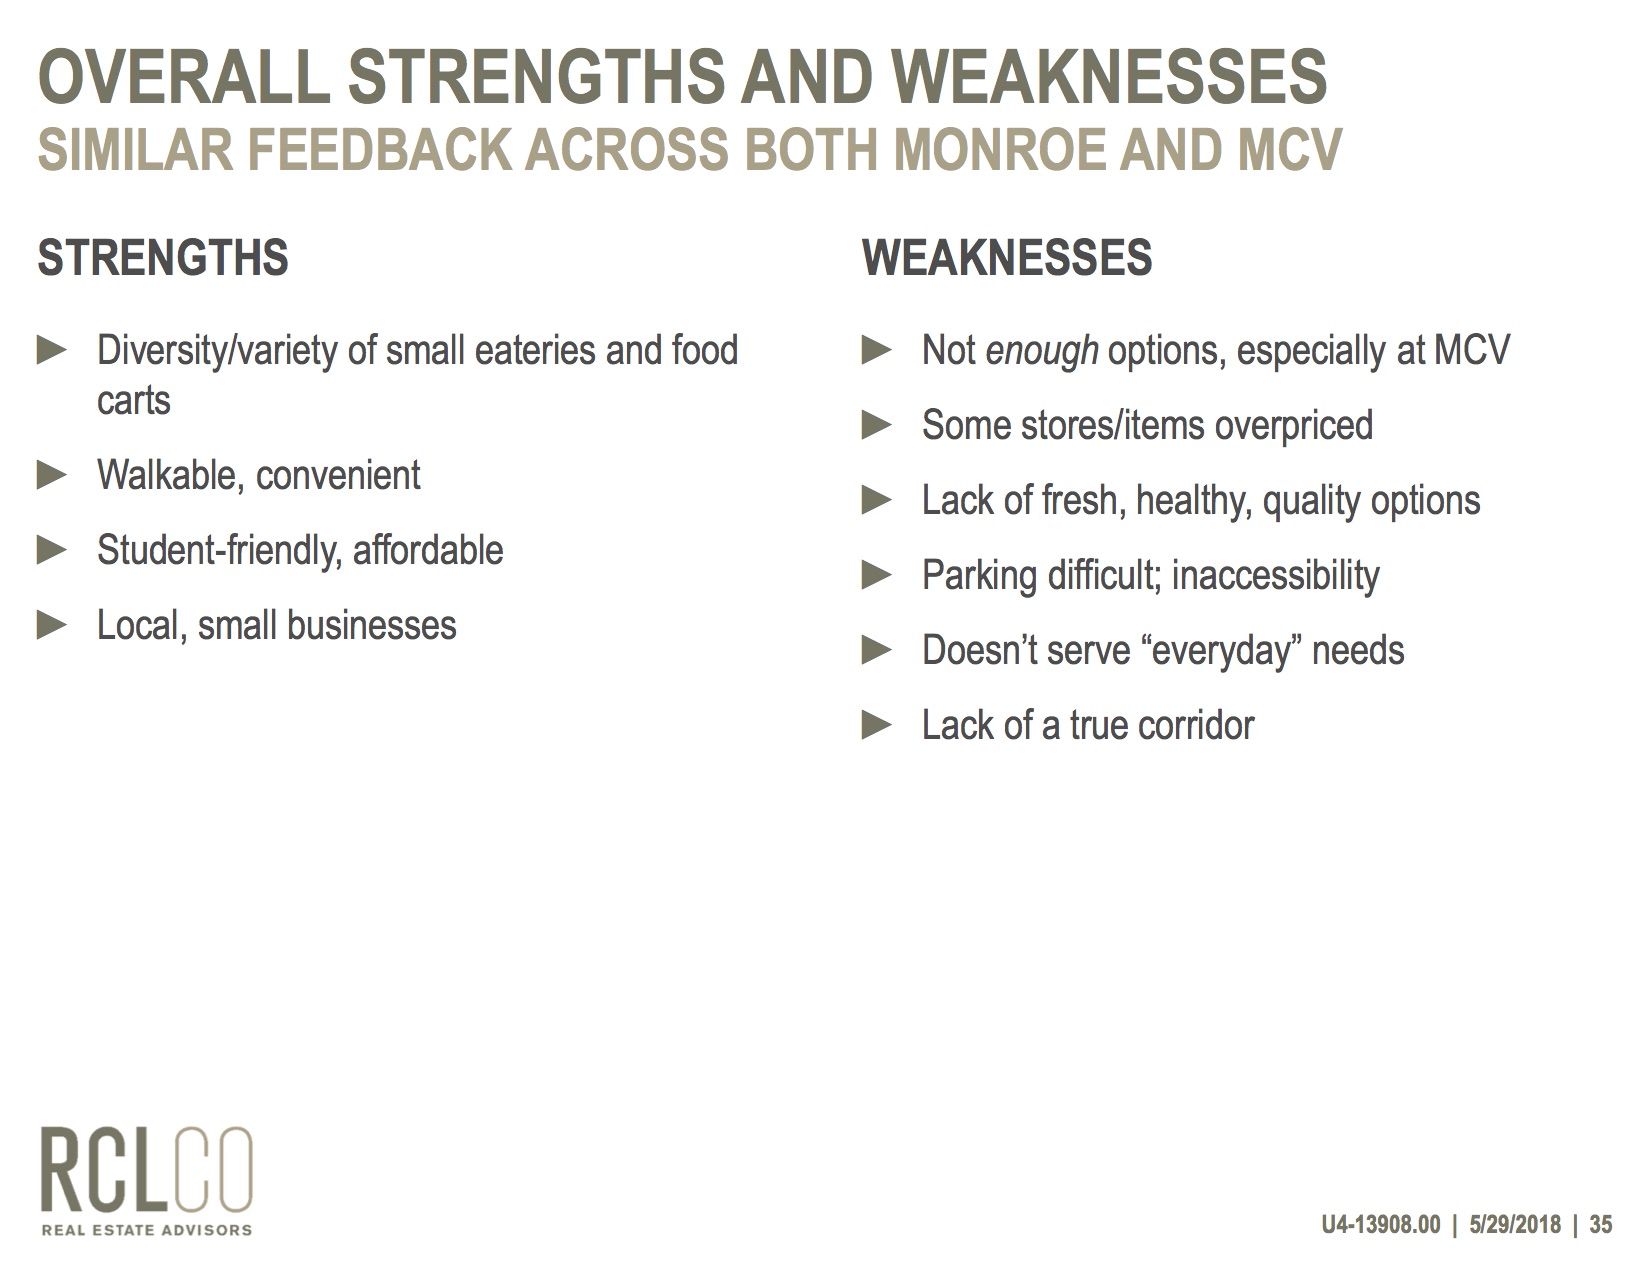 From retail survey, list of strengths and weaknesses, similar feedback across both Monroe and MCV